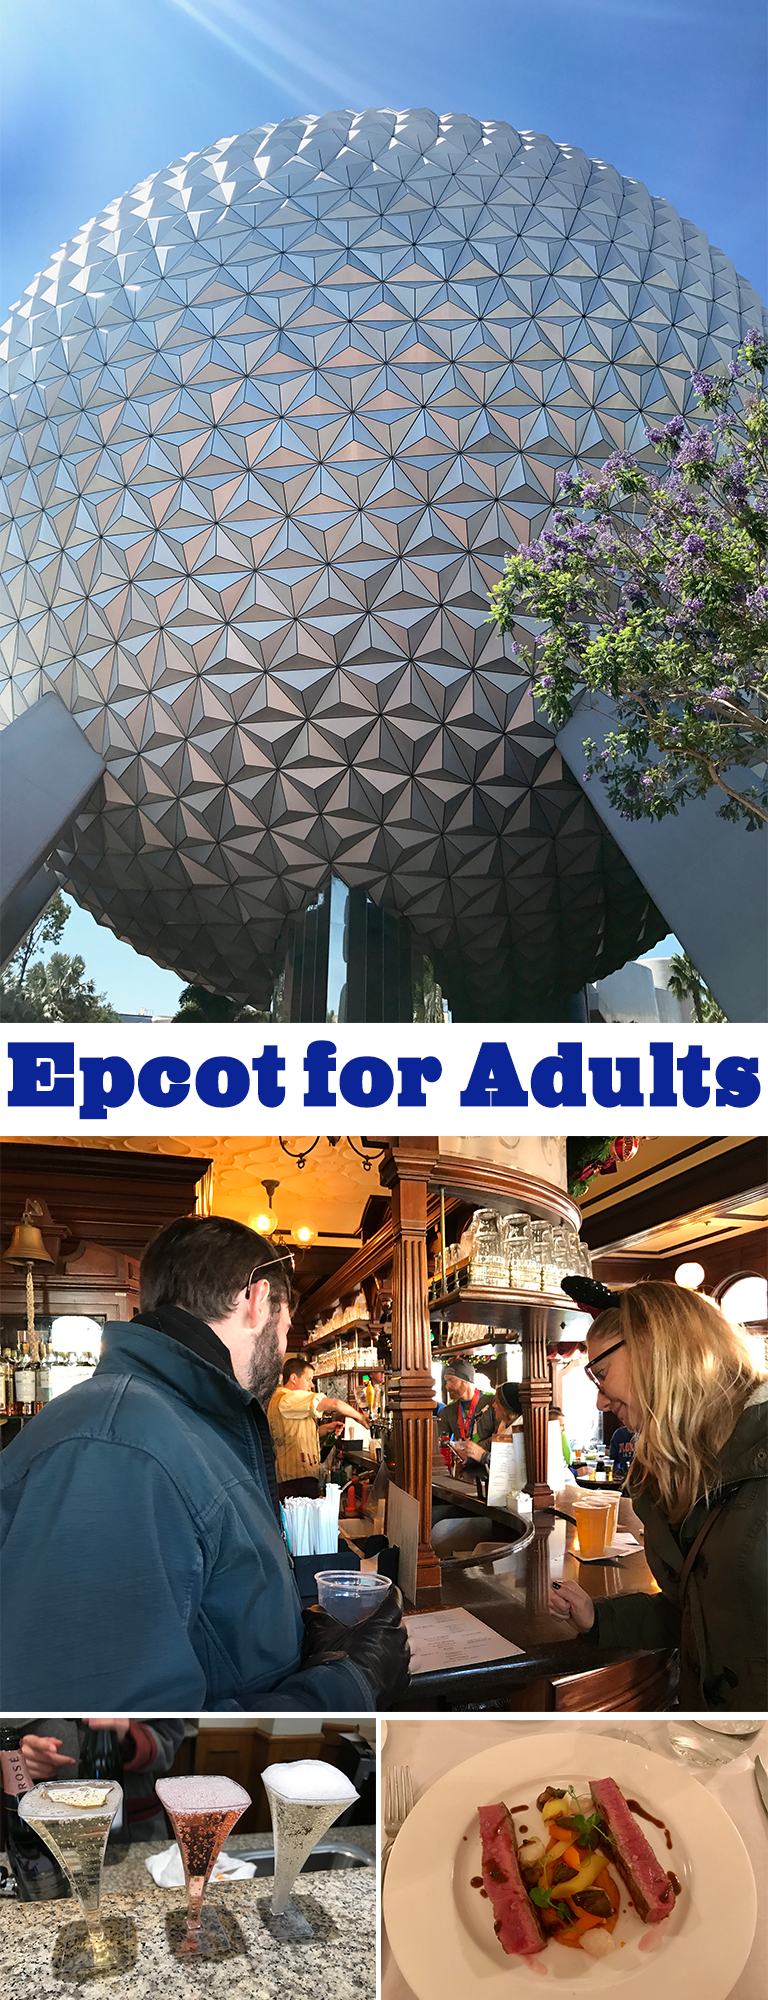 Epcot For Adults